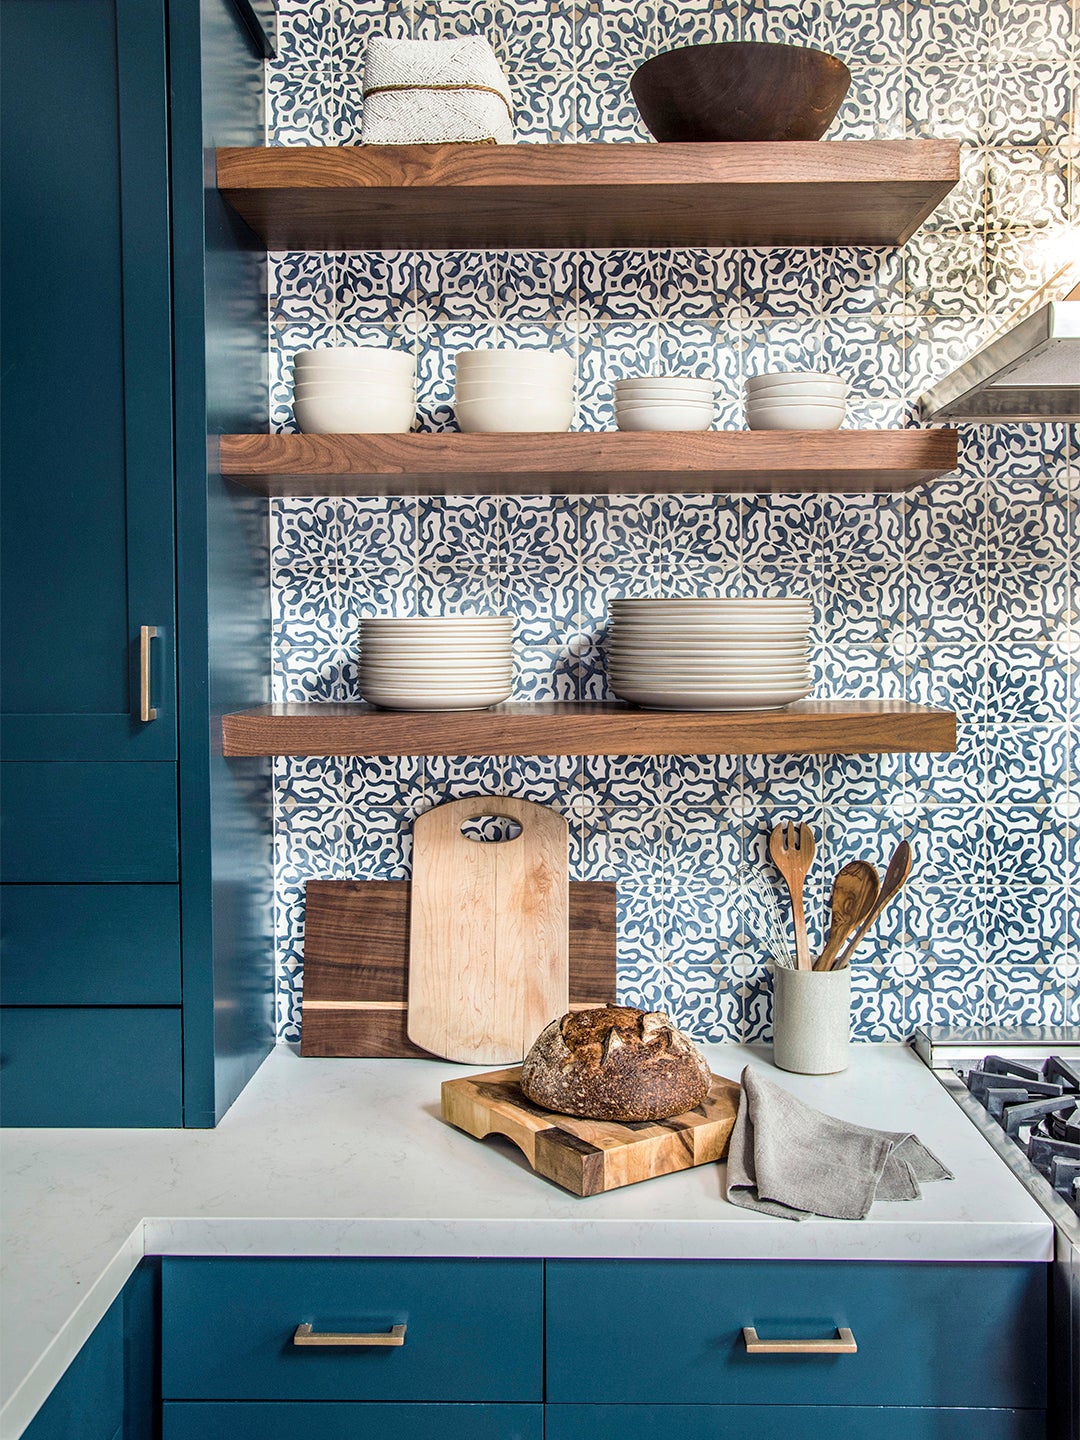 Open shelving in front of tiled walls